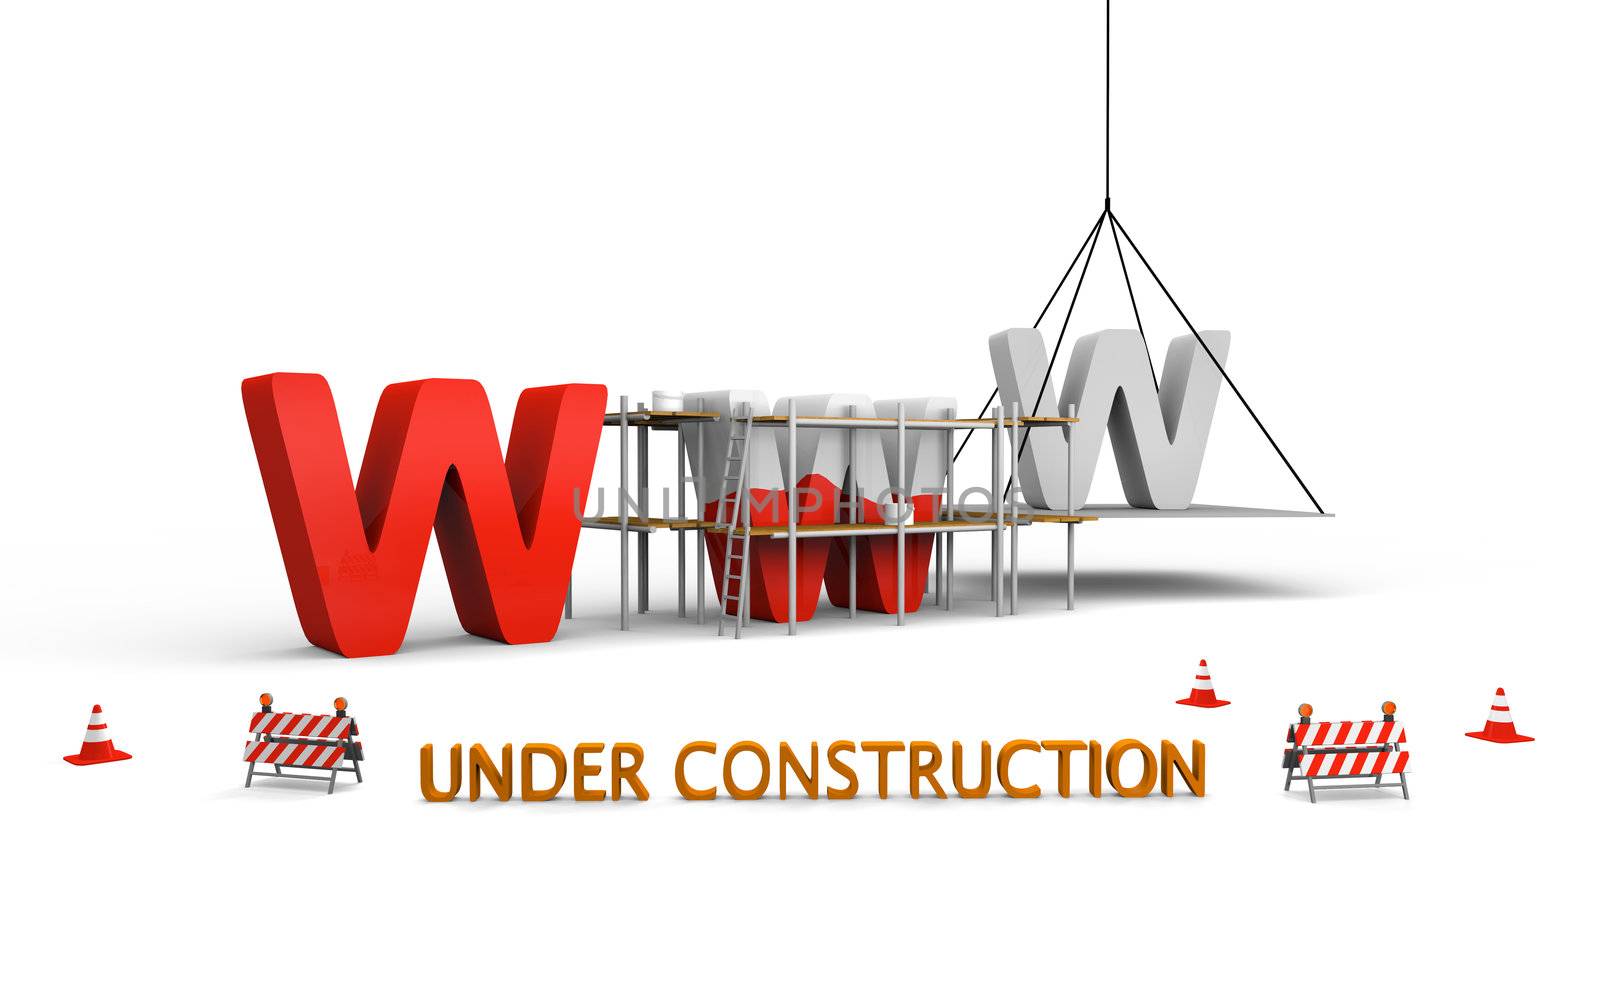 Website under construction by Harvepino